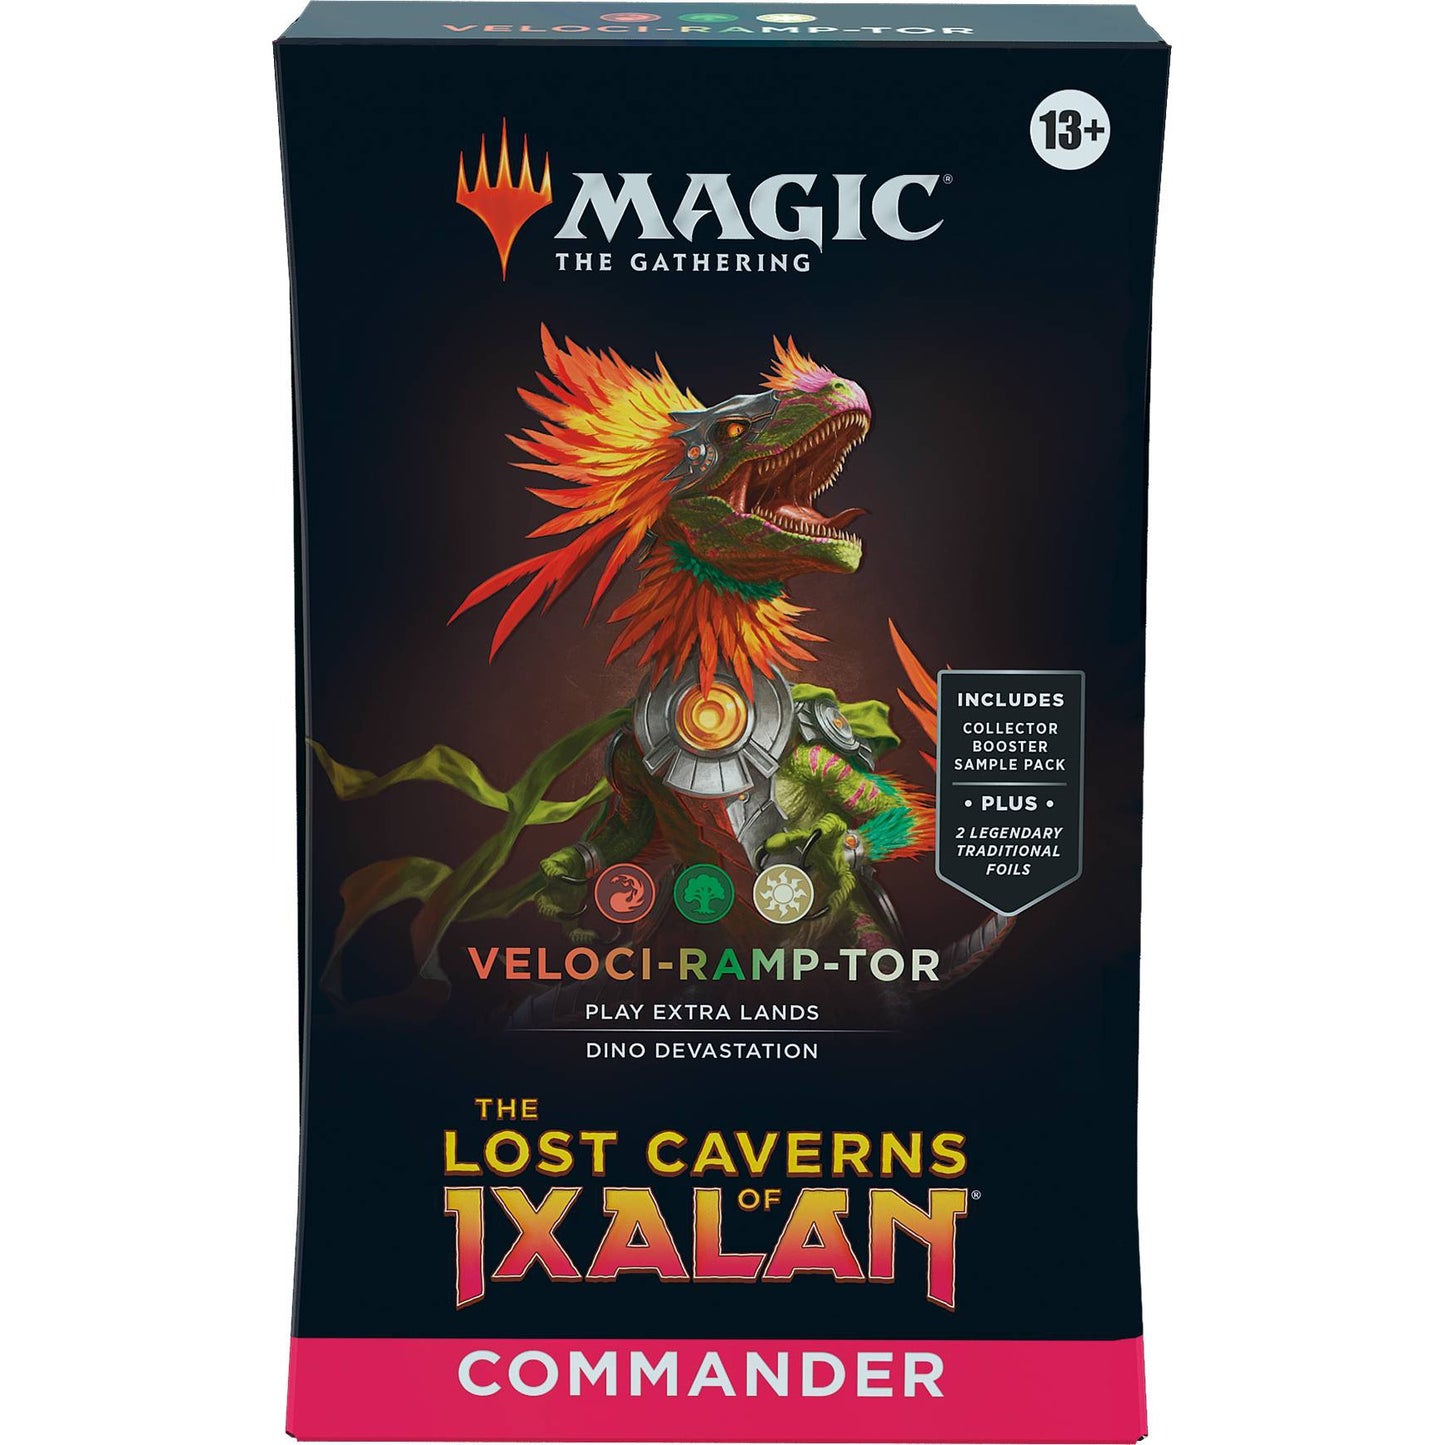 Magic the Gathering: The Lost Caverns of Ixalan Commander deck